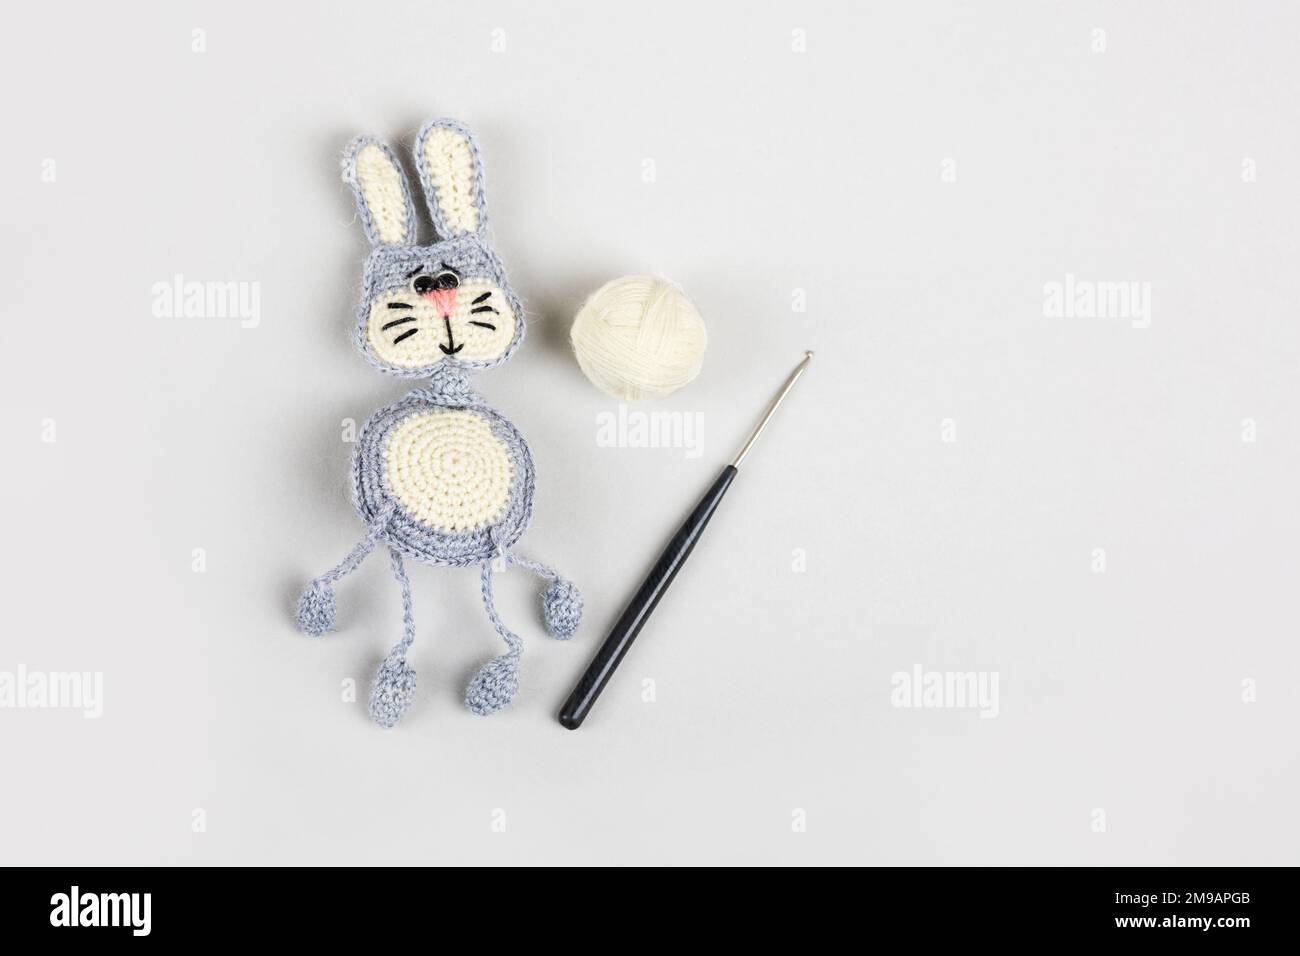 Knitted children's toy hare or bunny with a balls of thread and a crochet hook on a gray background. Stock Photo